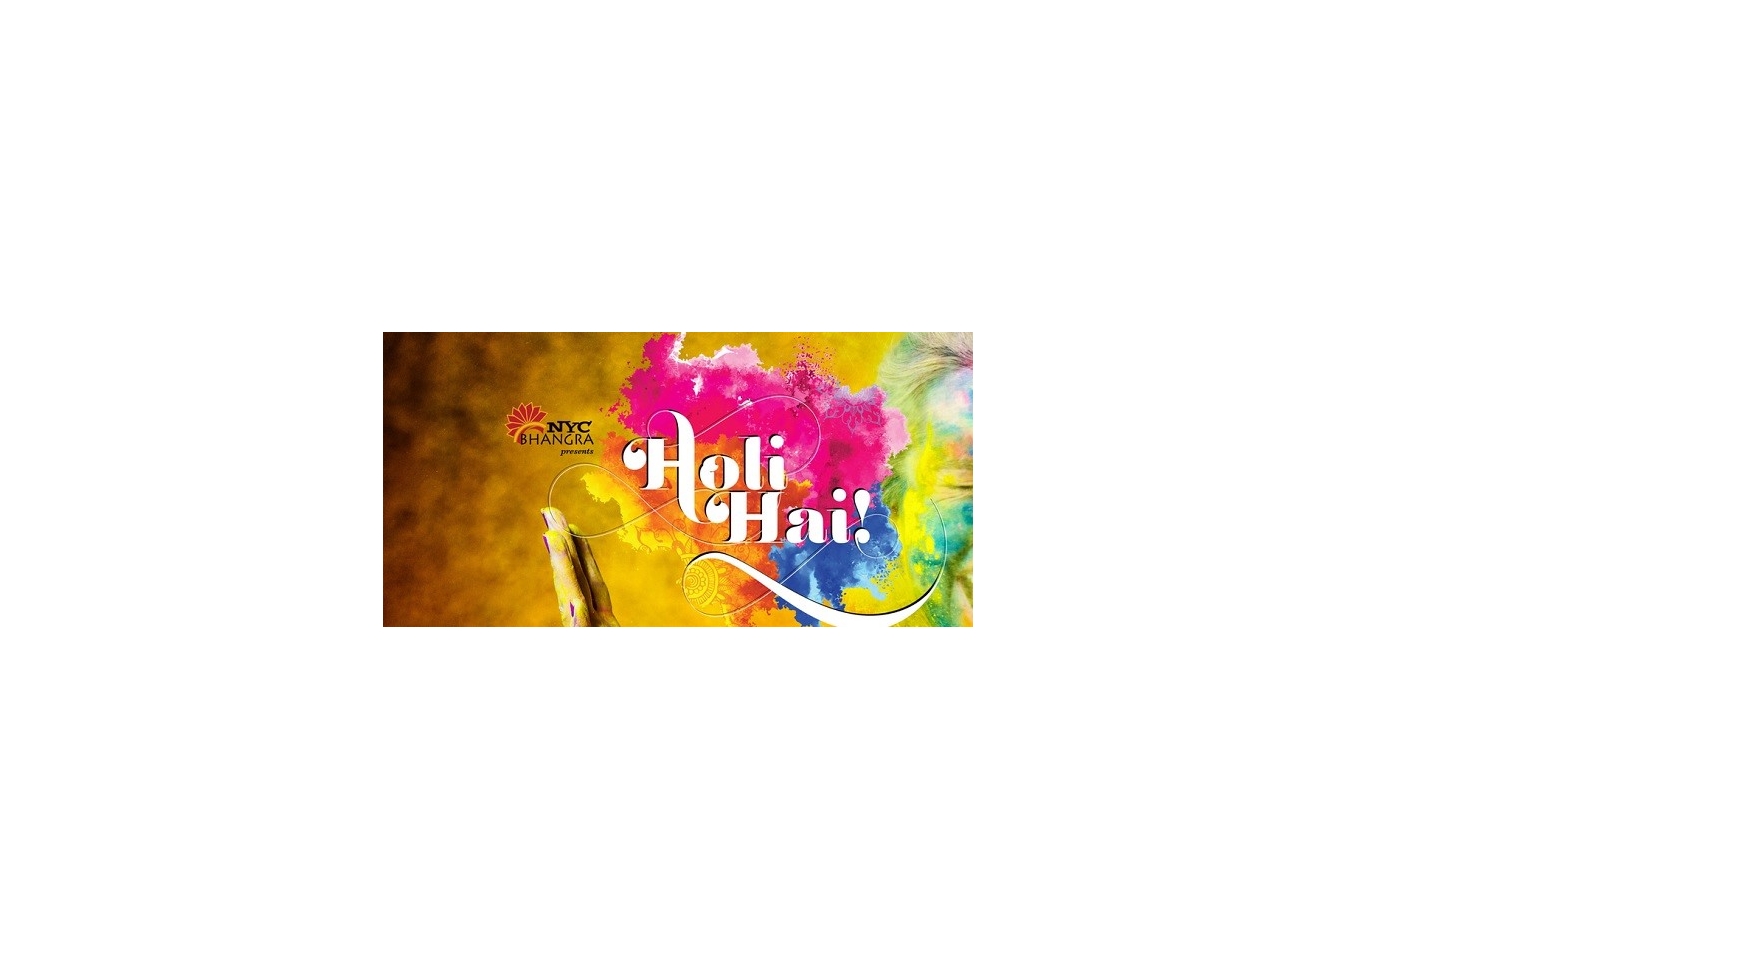 NYC HOLI HAI 2018 - Largest Festival of Colors by NYC Bhangra Buy Tickets Online | New York , Sat , 2018-05-12 | ThisisShow